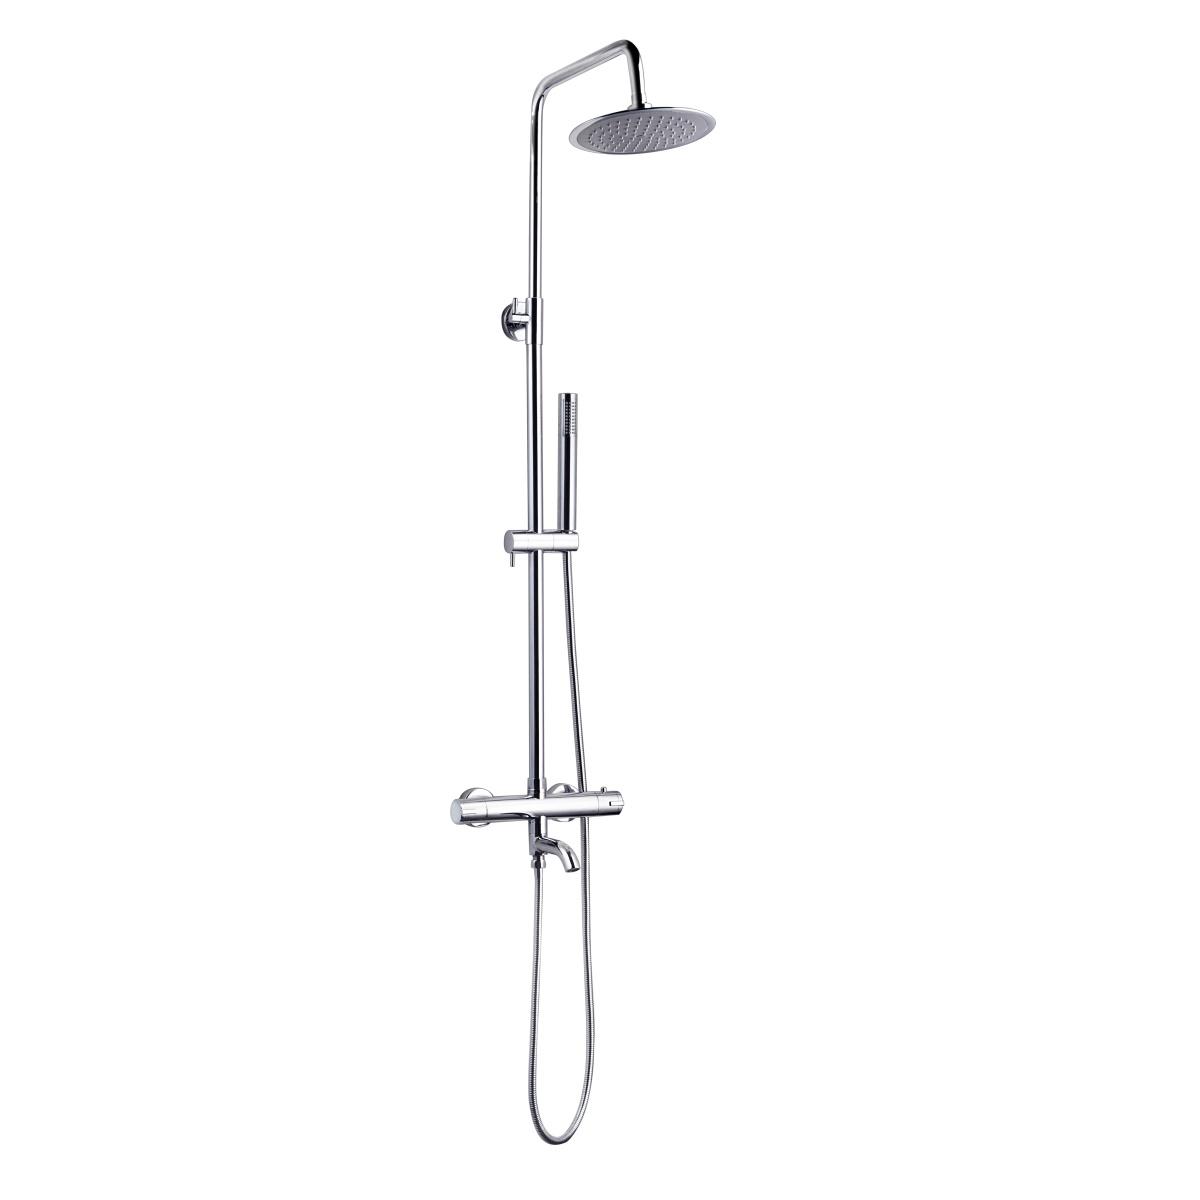 YS34222	Shower column with spout, thermostatic rain shower column, height adjustable;